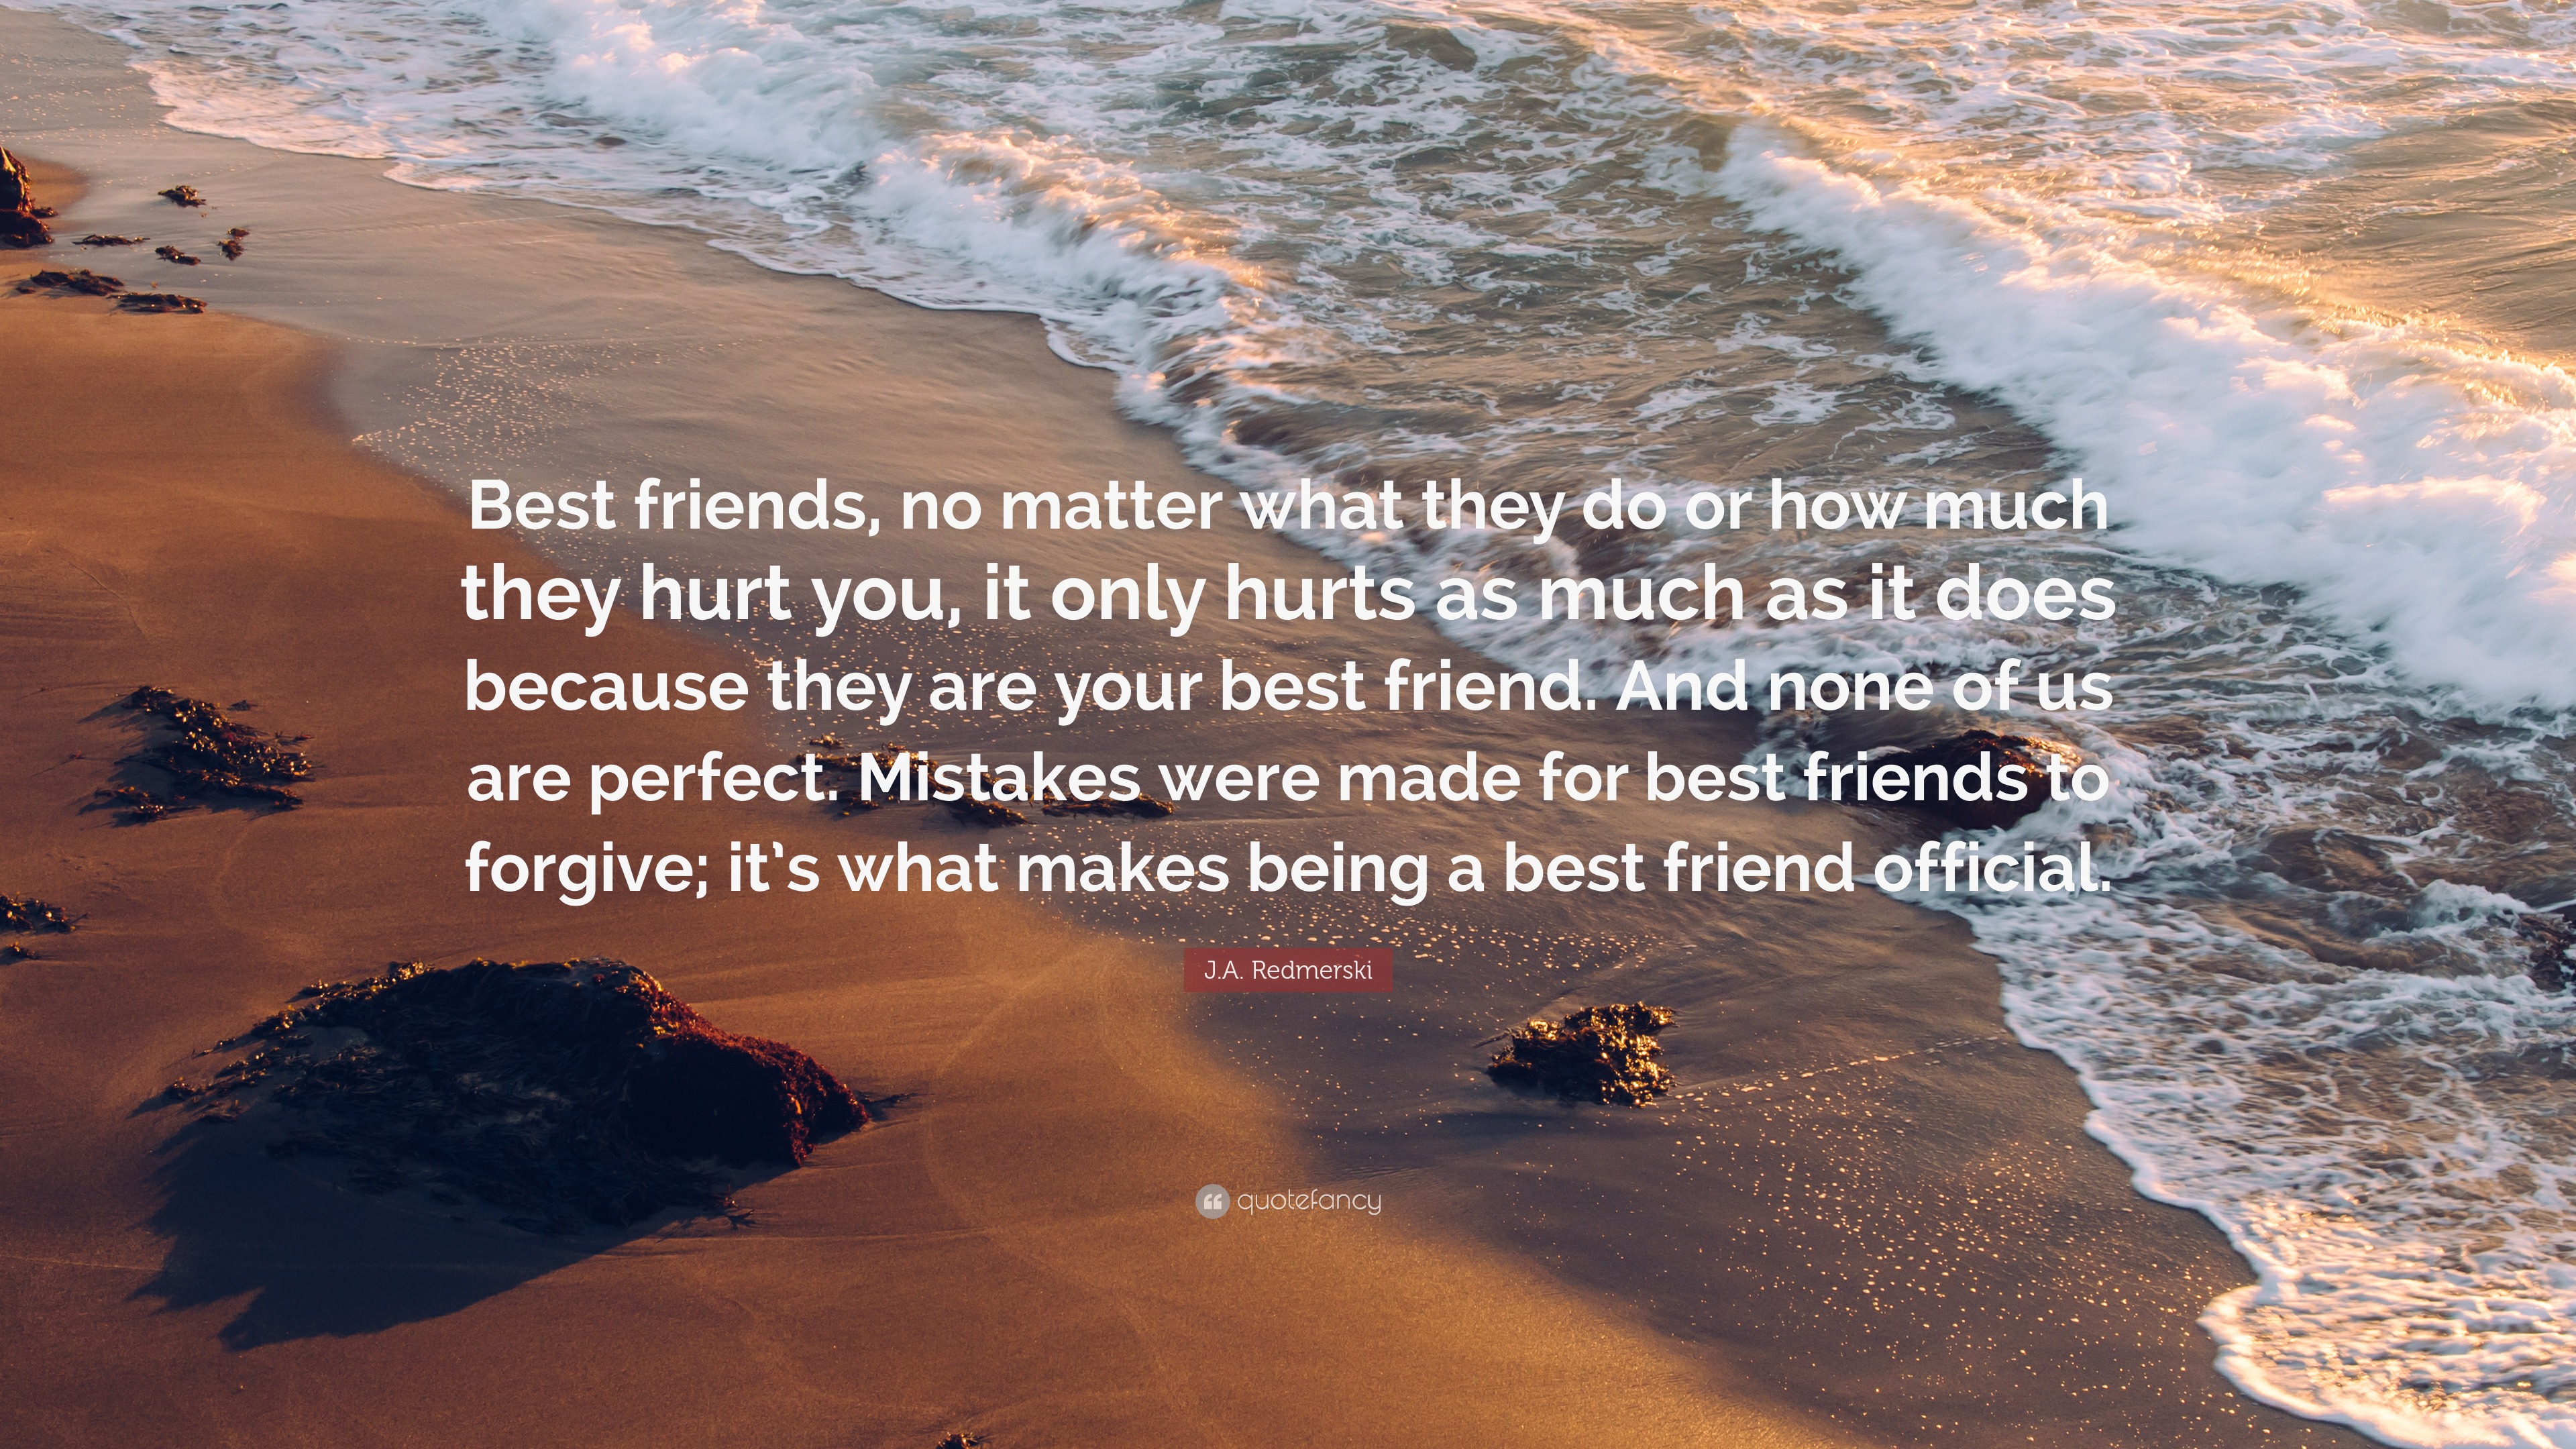 J.A. Redmerski Quote: “Best friends, no matter what they do or how much ...